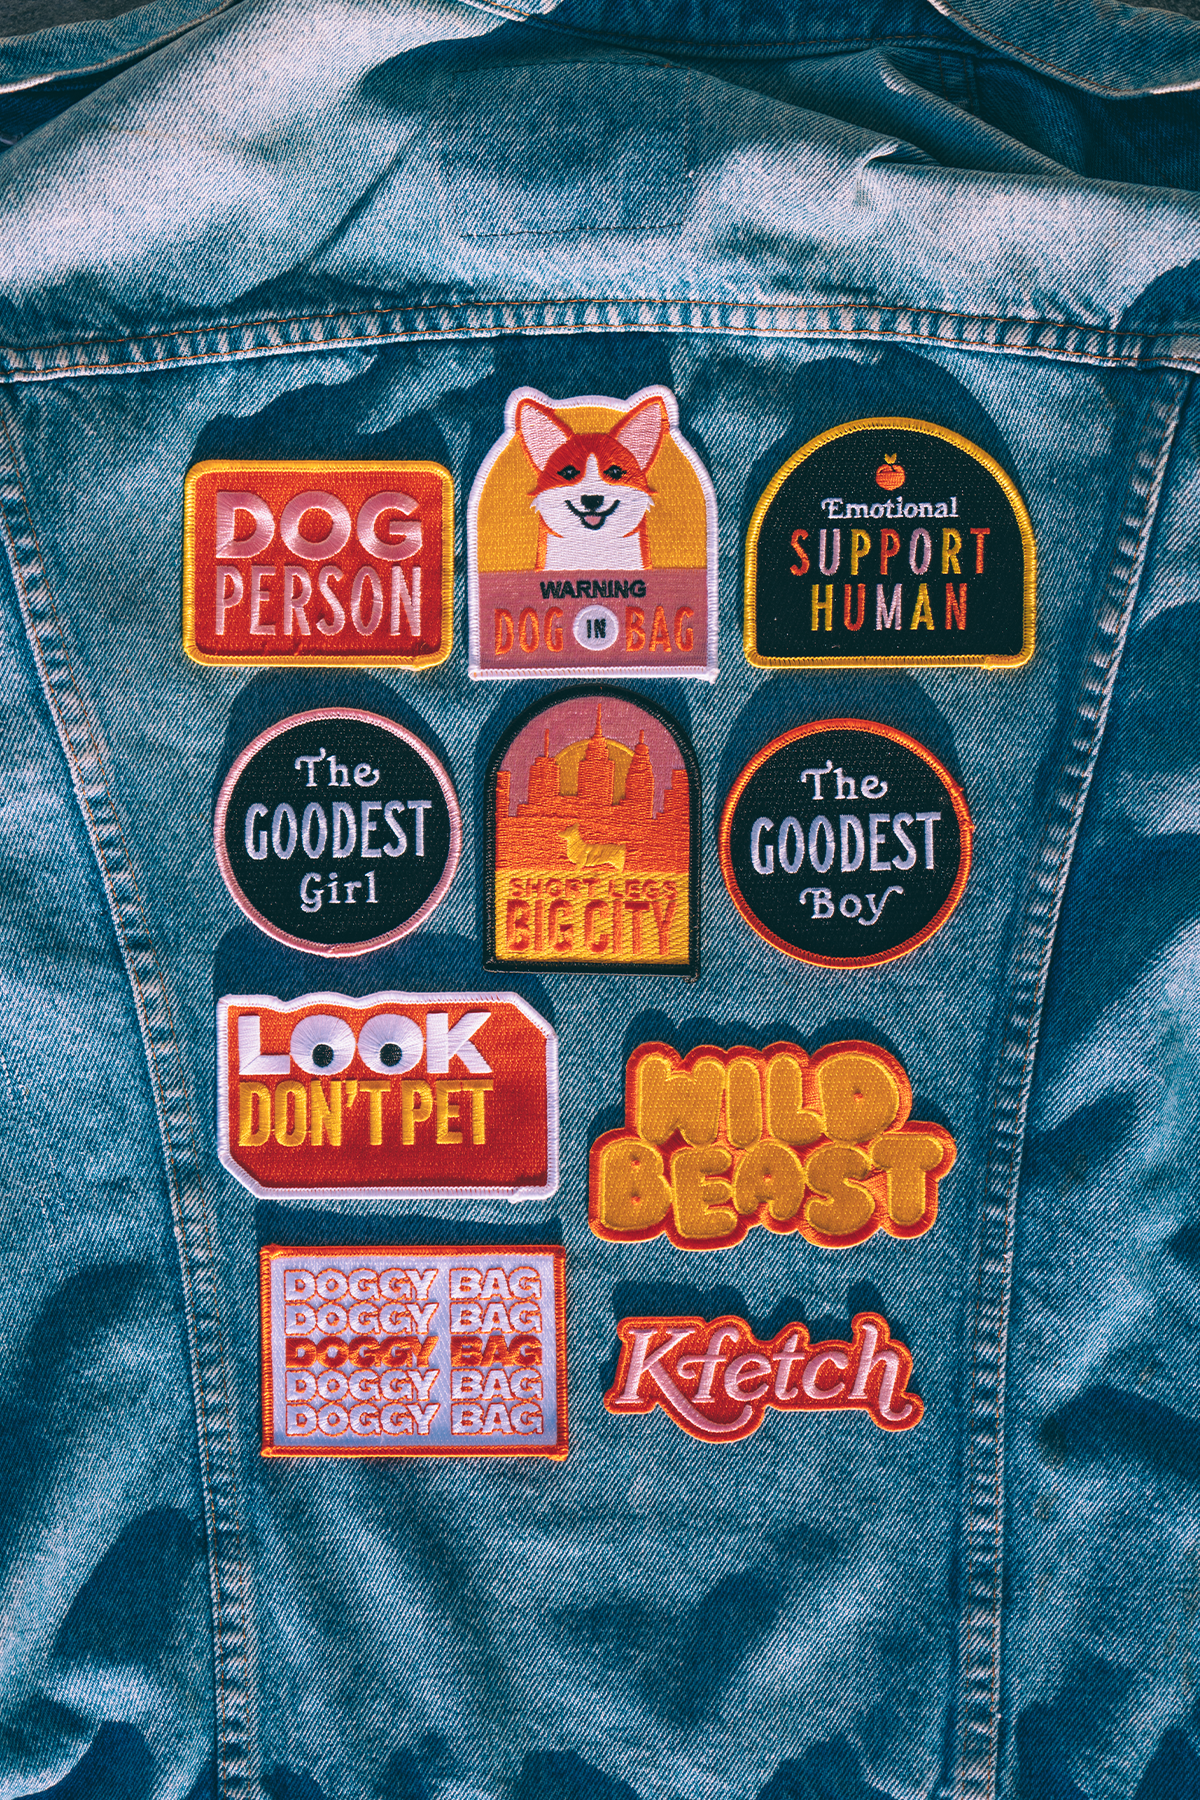 Doggy Bag Embroidered Patch • Maxine x Oxford Pennant